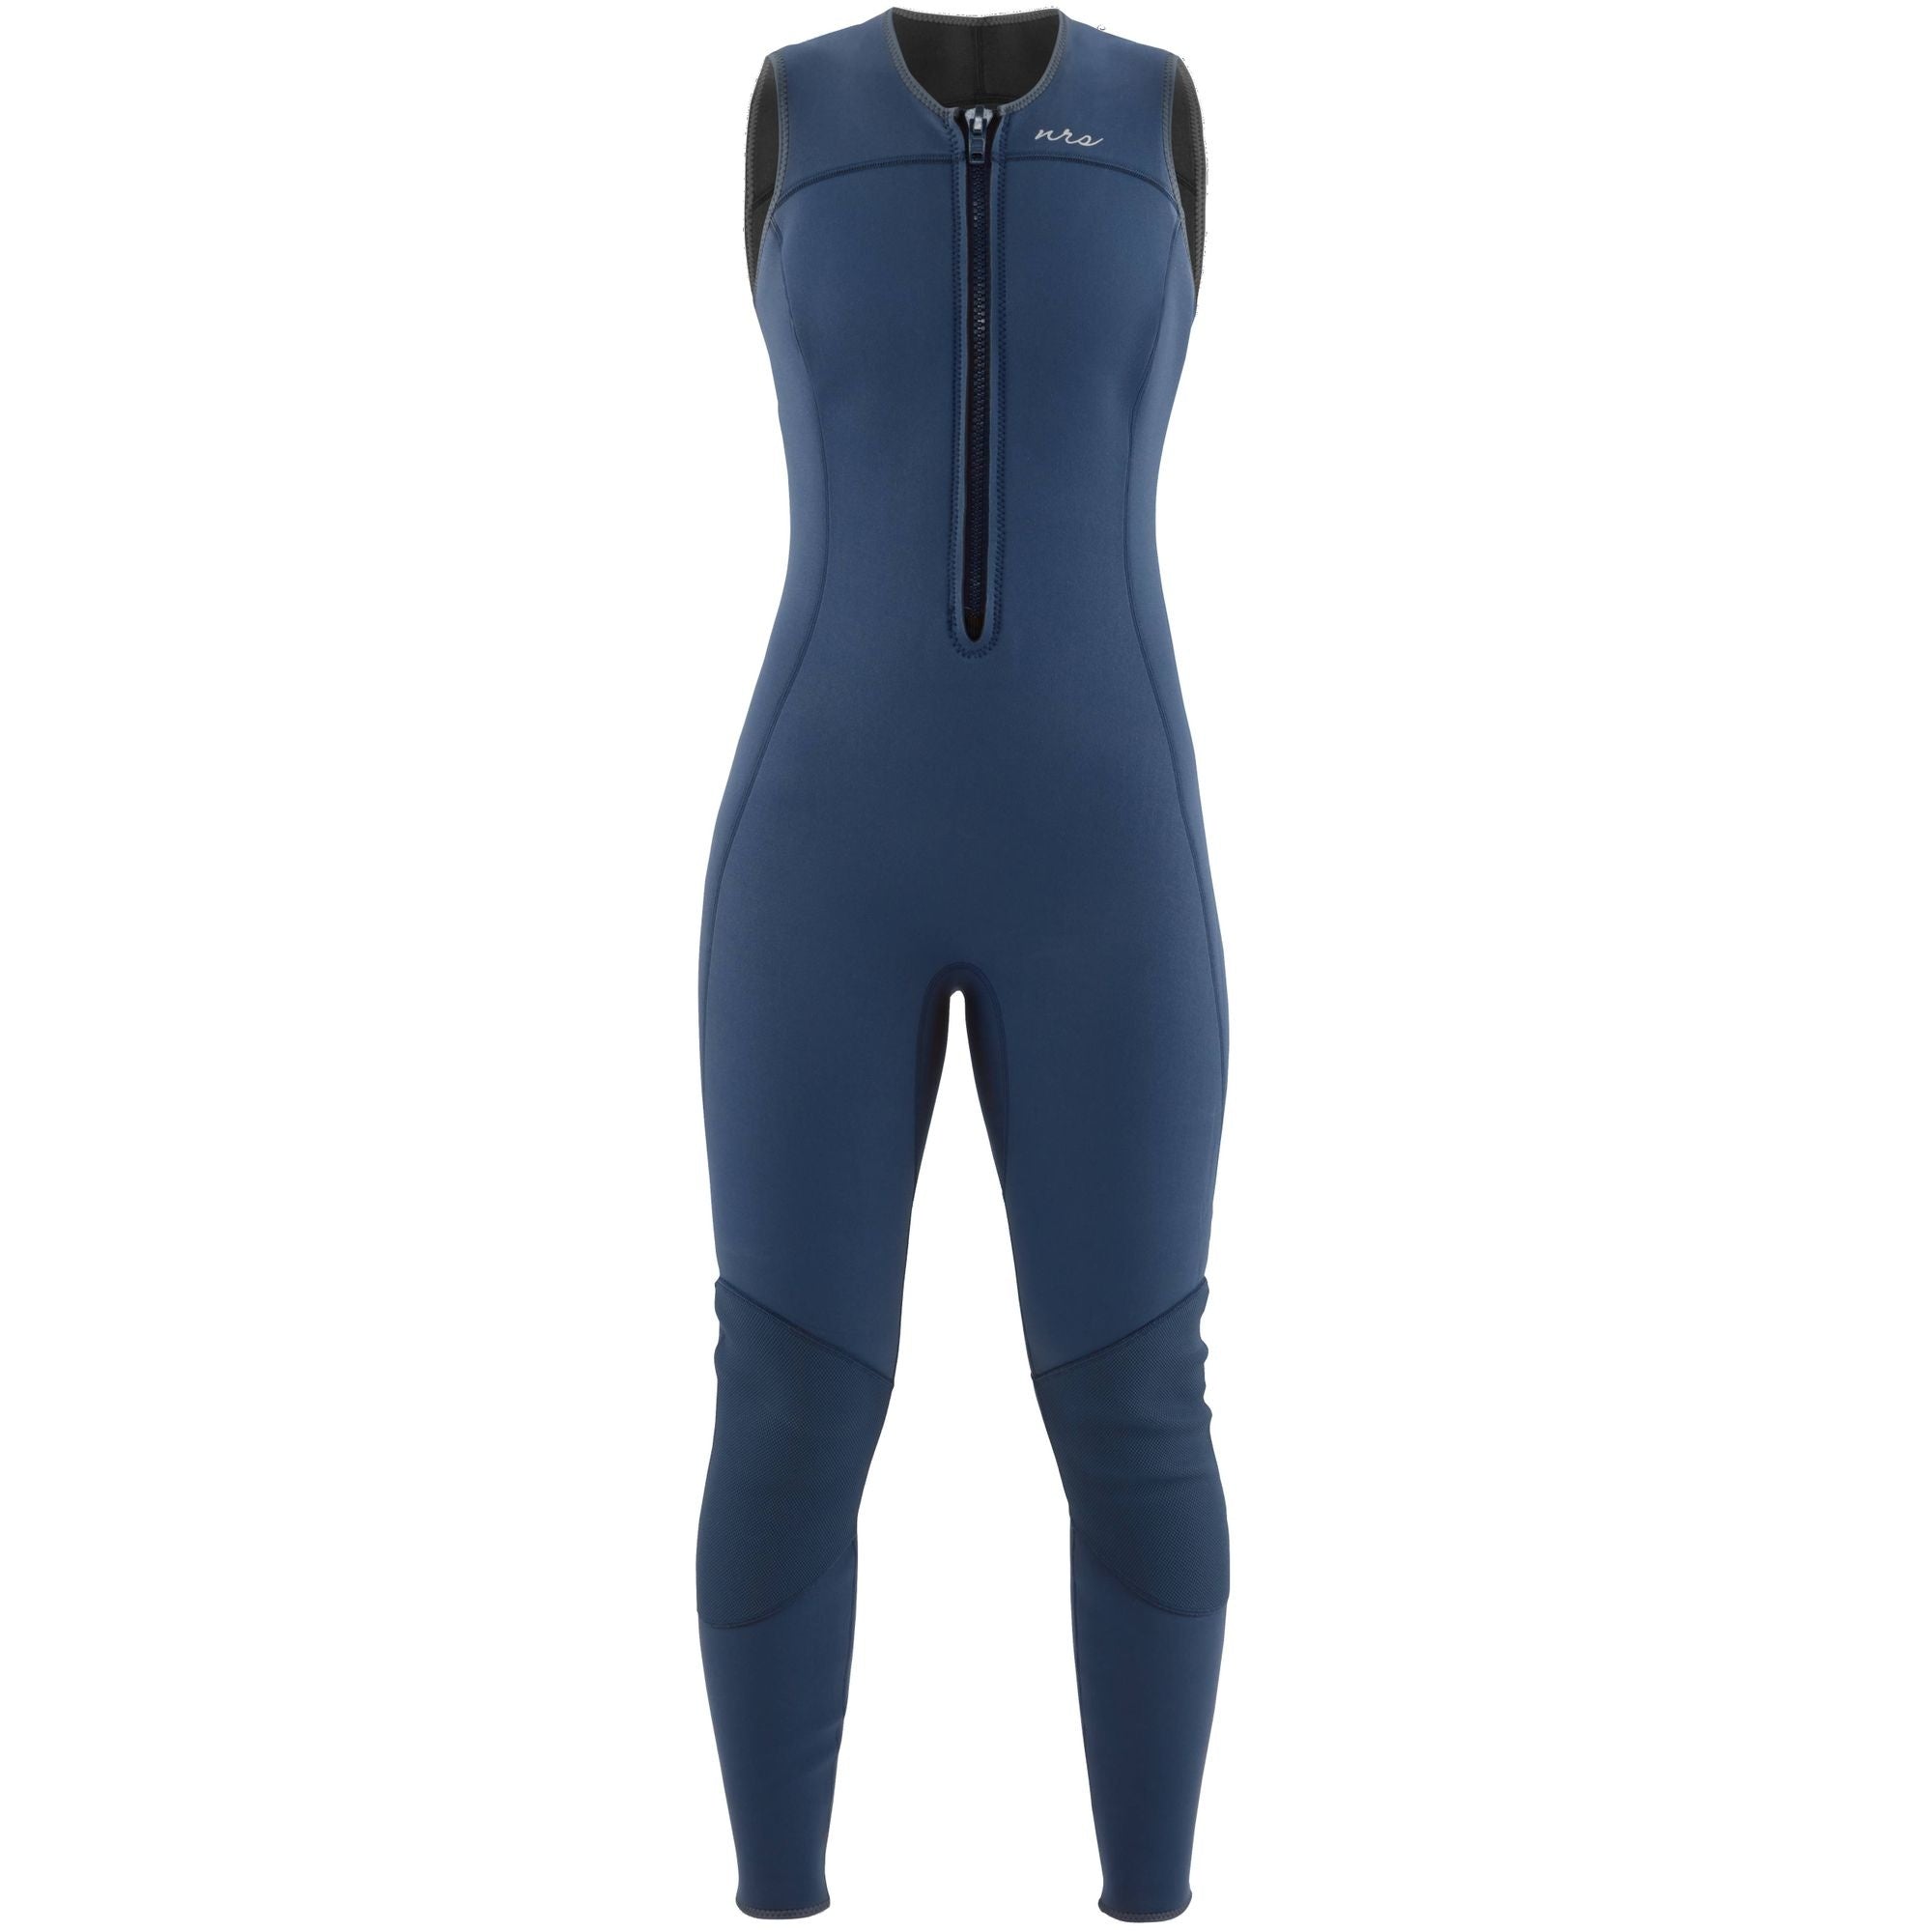 NRS - Women's 3.0 Ignitor Wetsuit